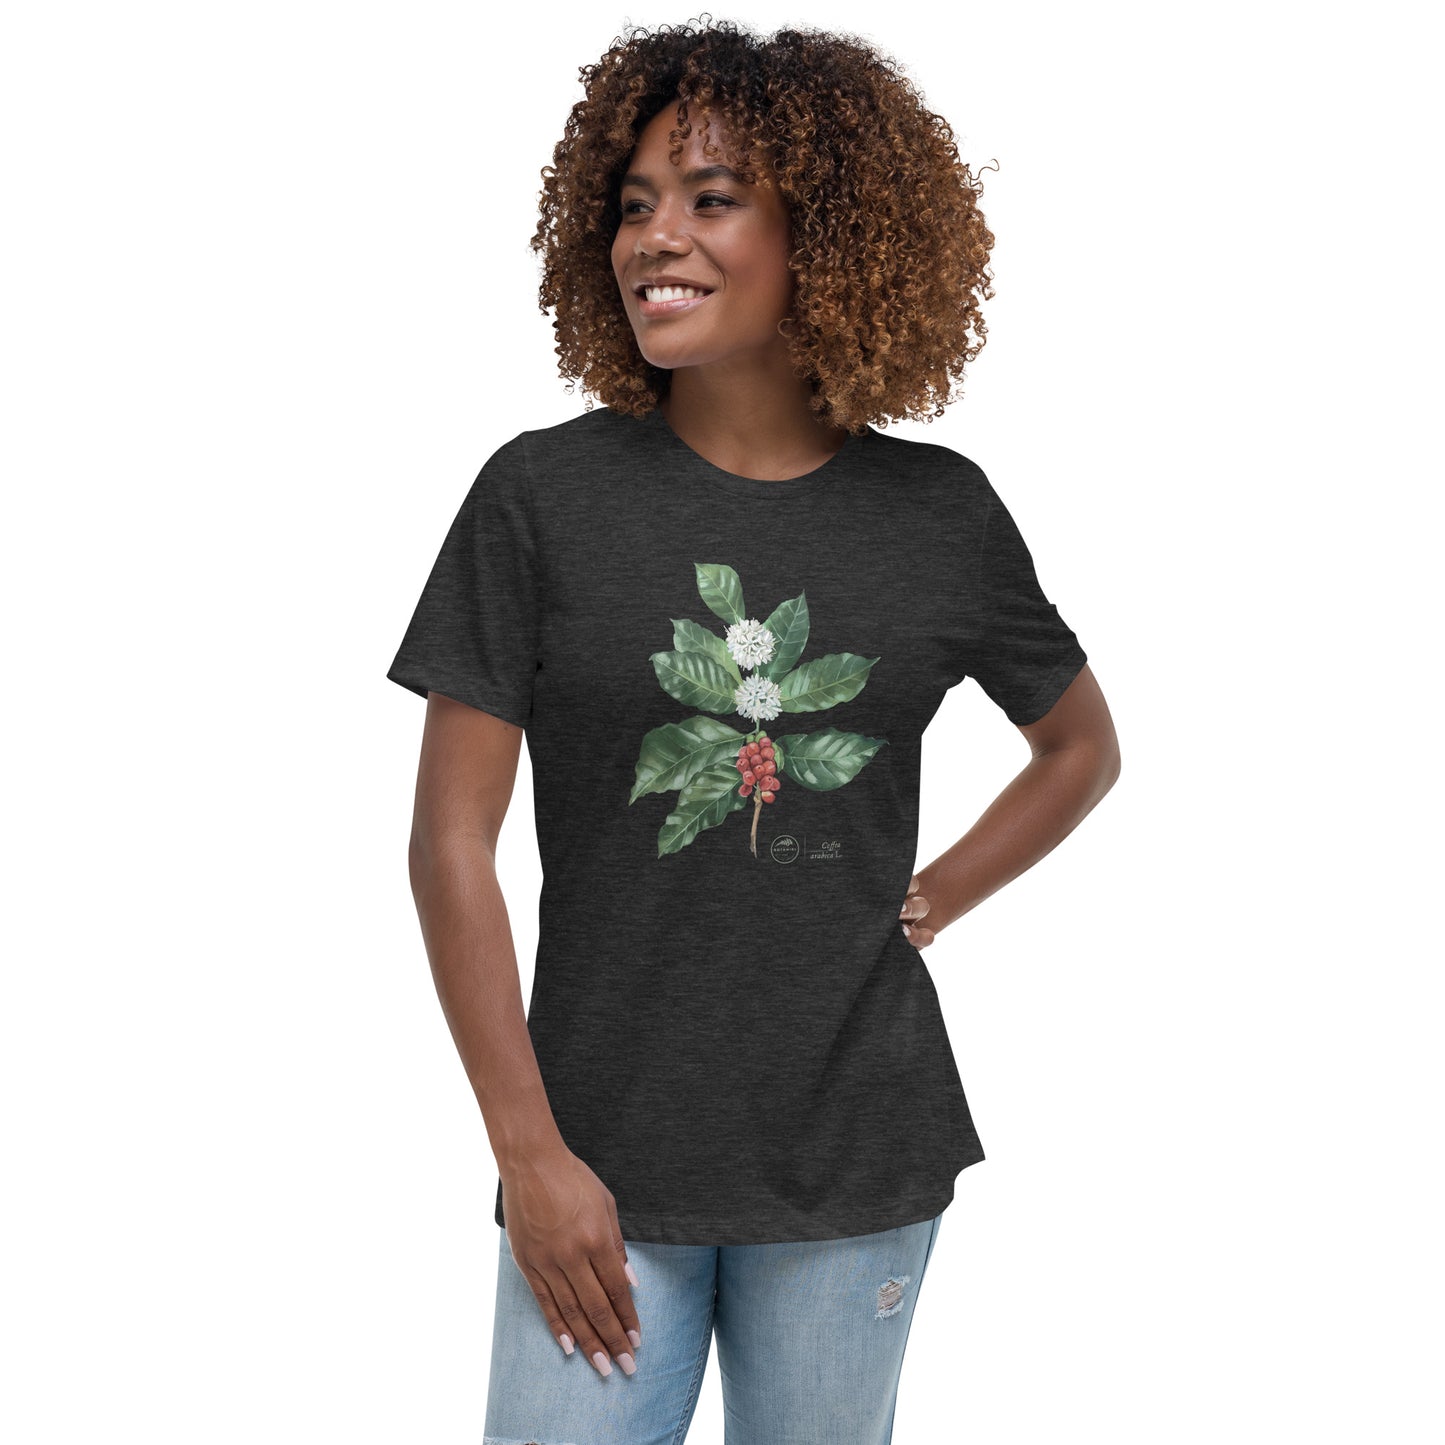 Women's Relaxed T-Shirt - Coffee tree